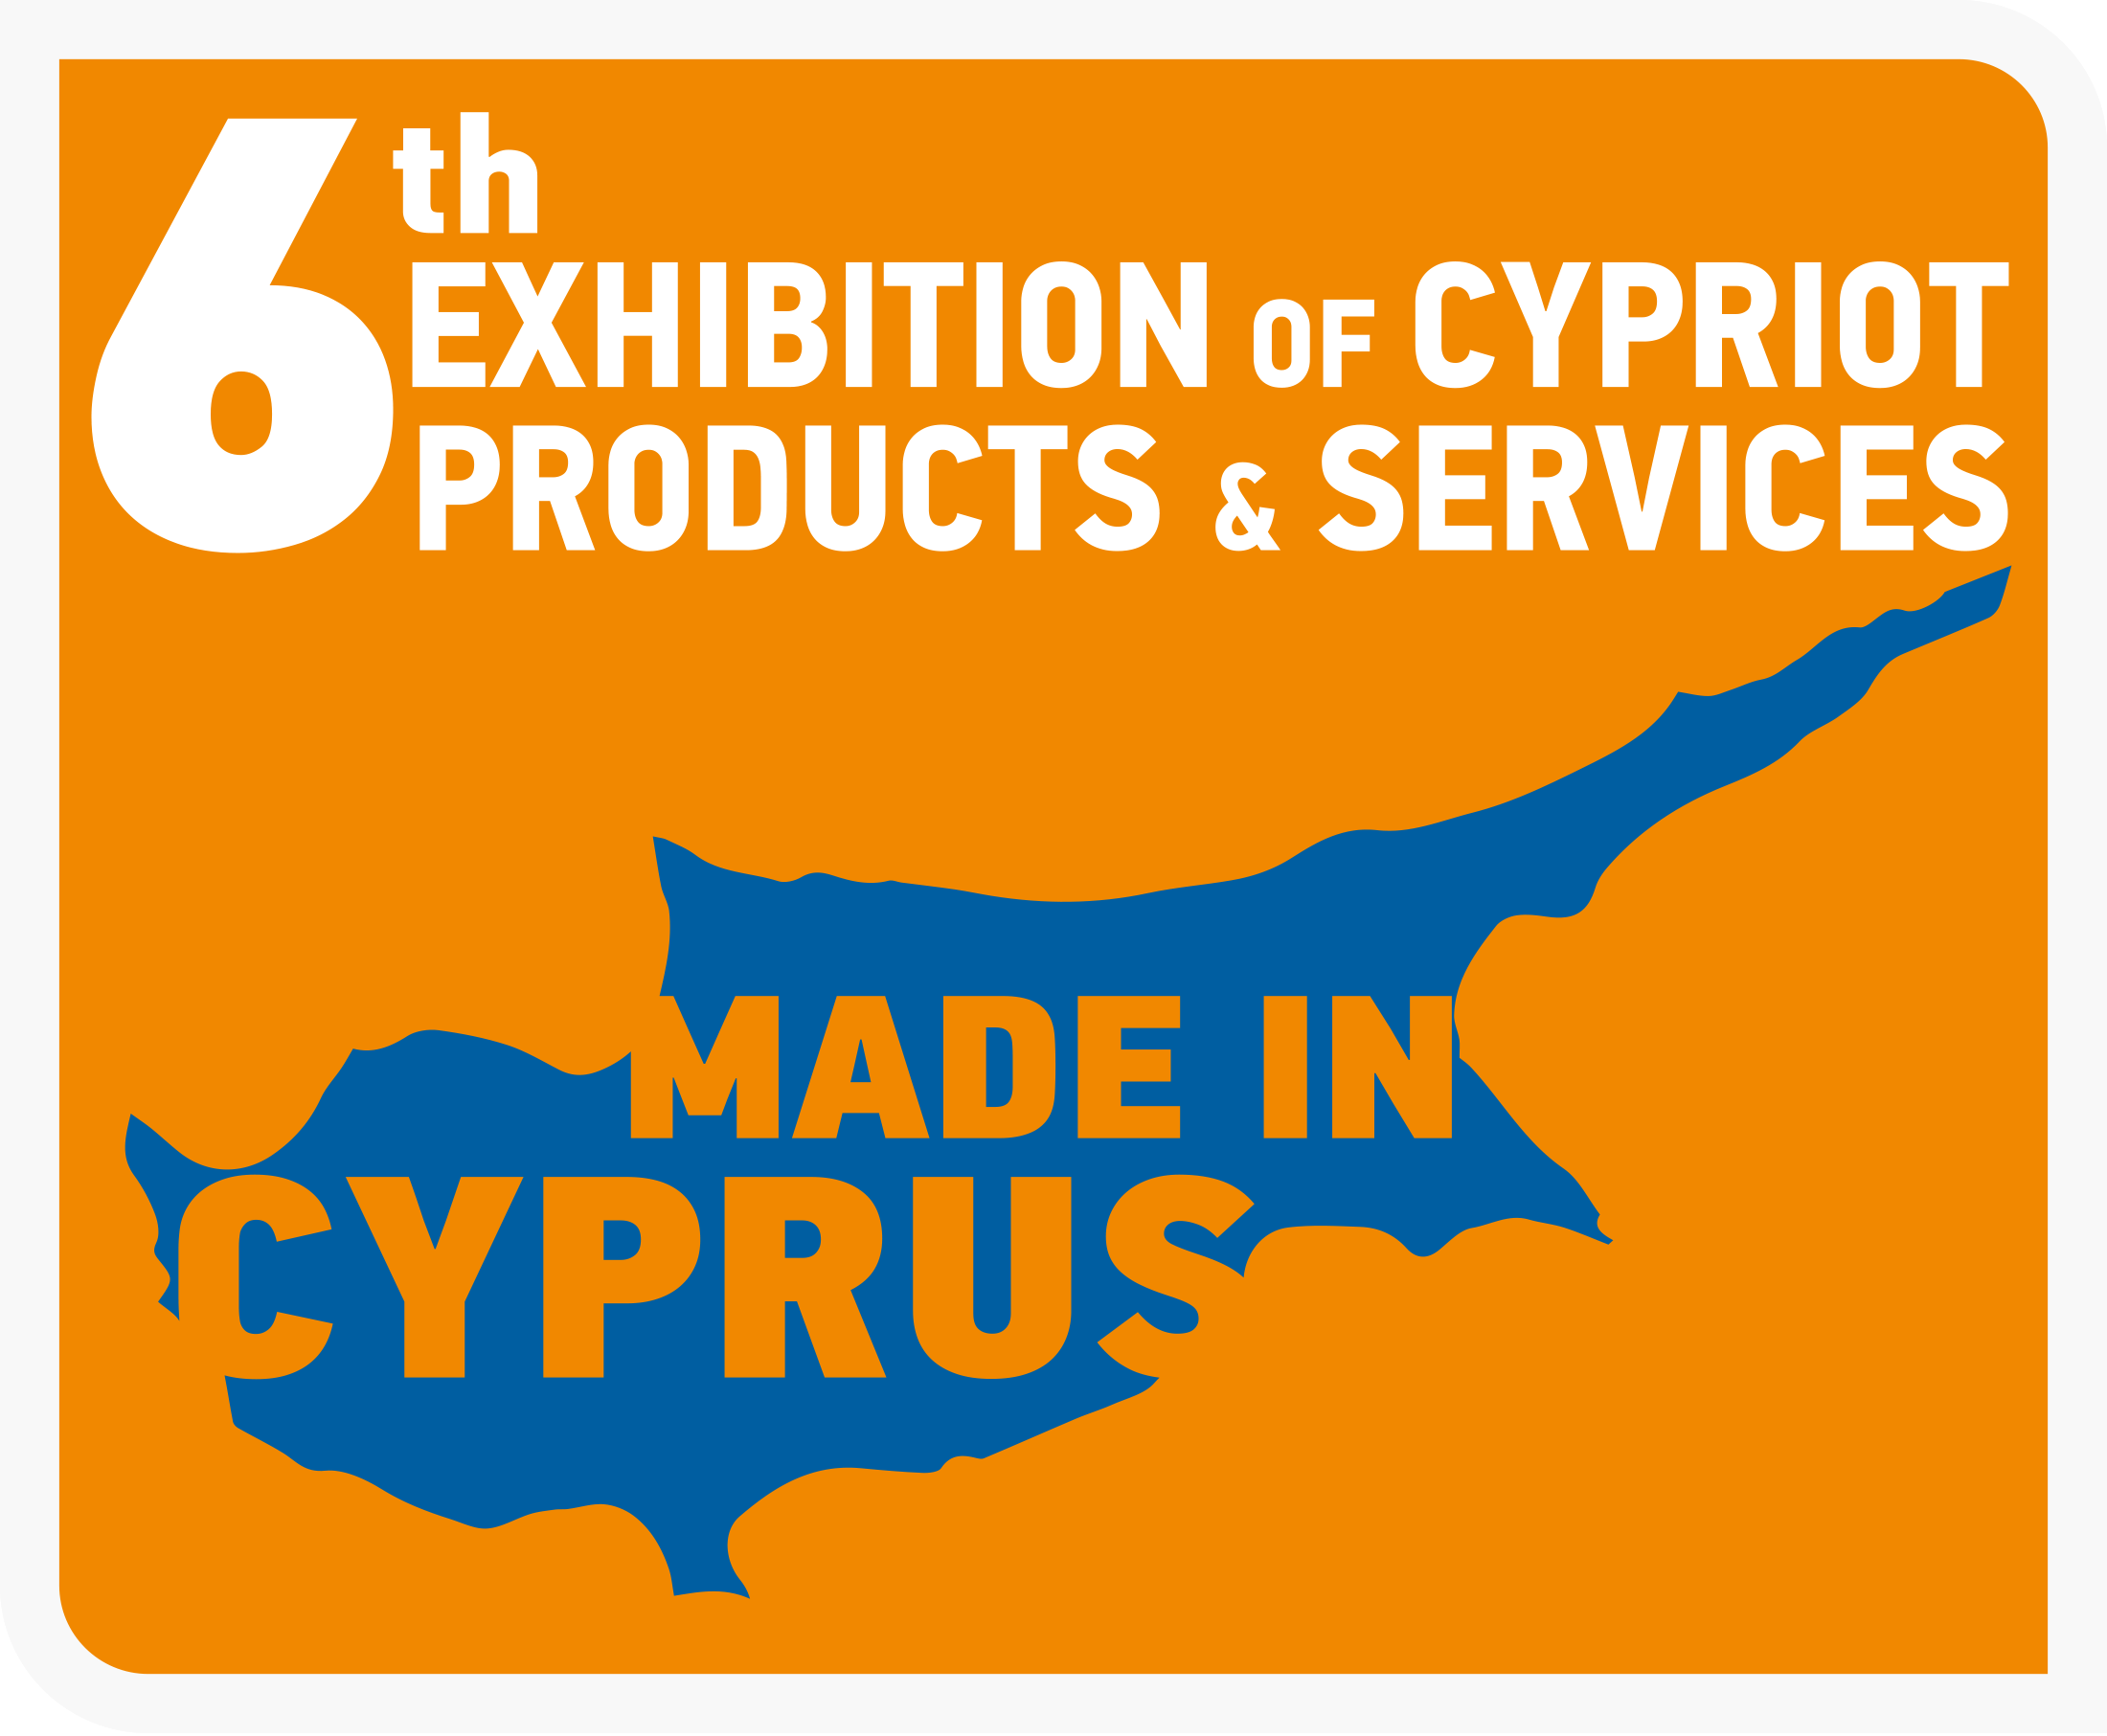 6th Made in Cyprus Exhibition | 27-29 Sept 2019